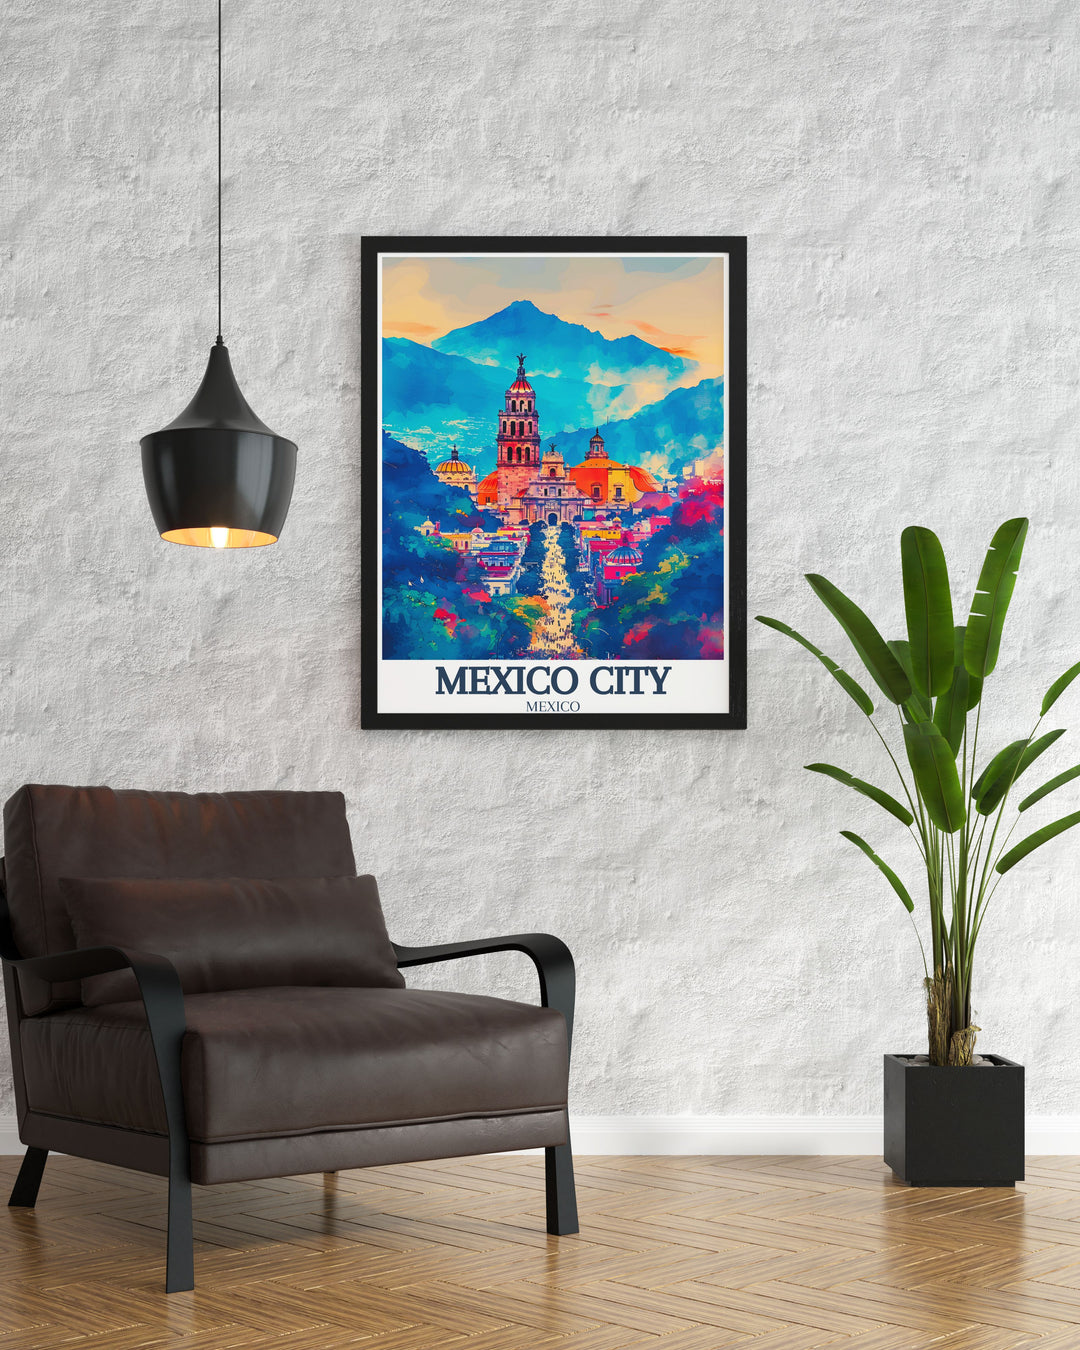 Metropolitan cathedral Zocalo Chapultepec castle artwork captures the essence of Mexico Citys iconic landmarks. This print is ideal for adding a touch of Mexican heritage and culture to your living space or office.